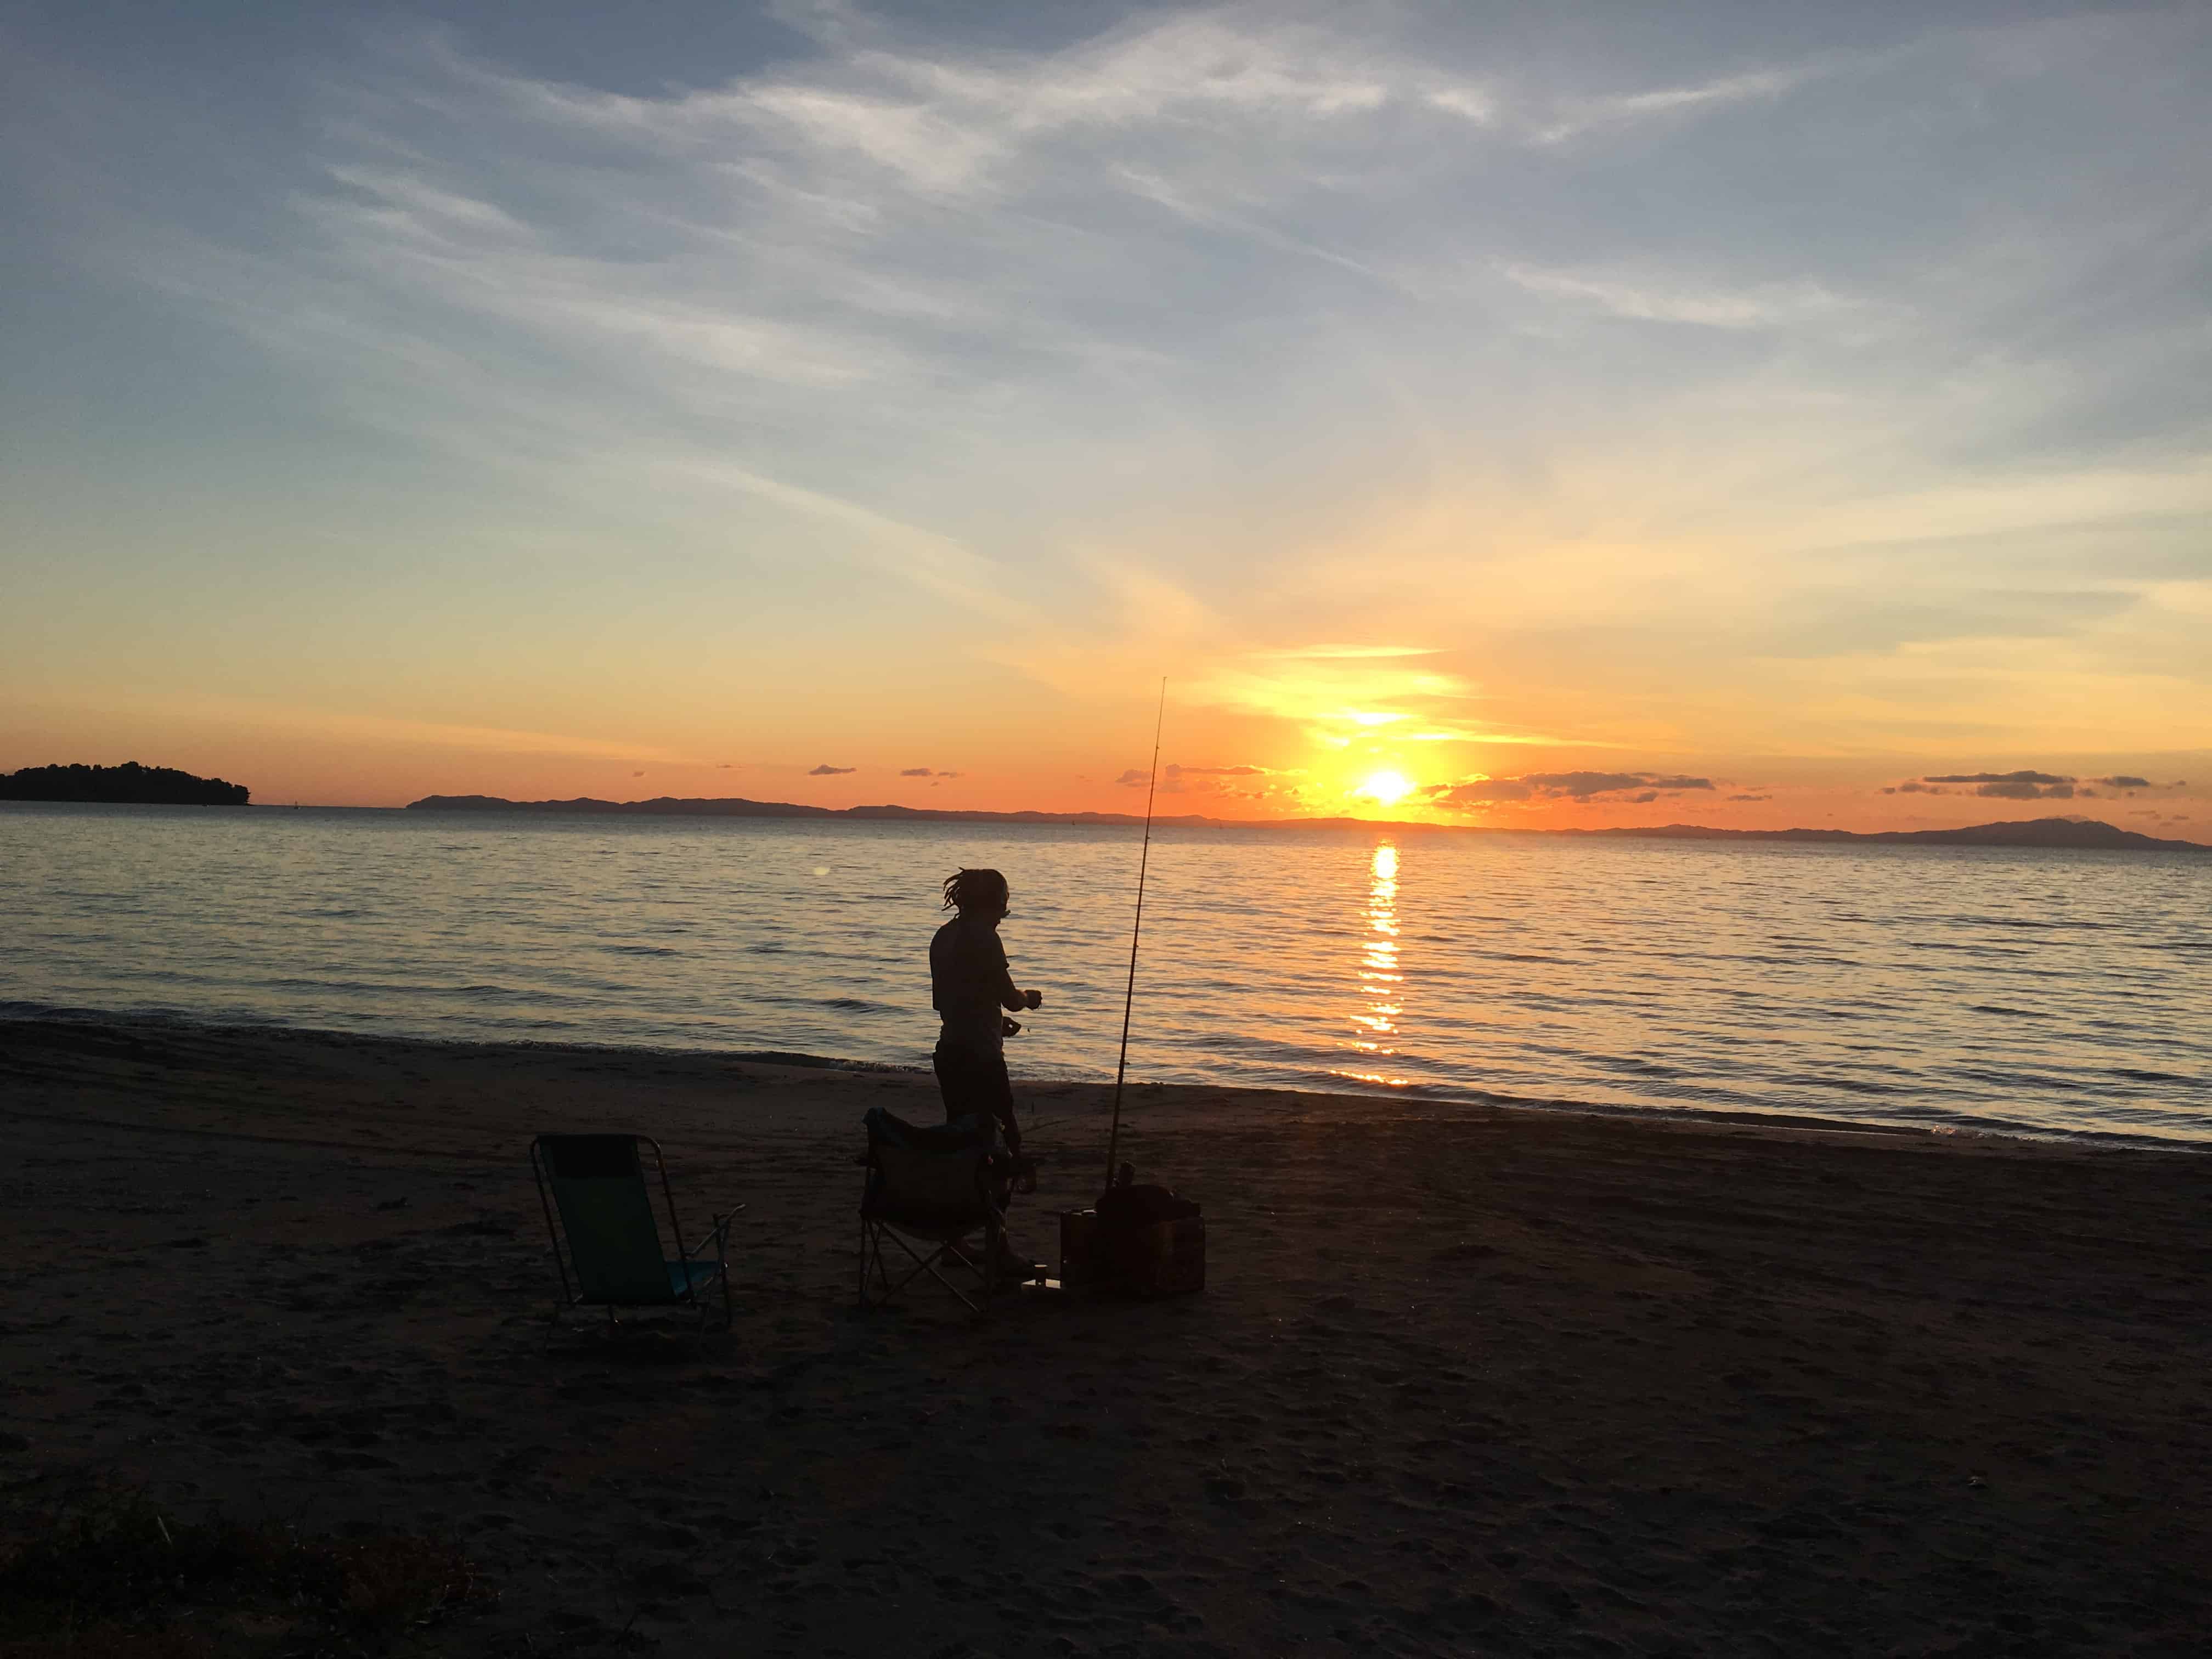 Mike is fishing in the sunset